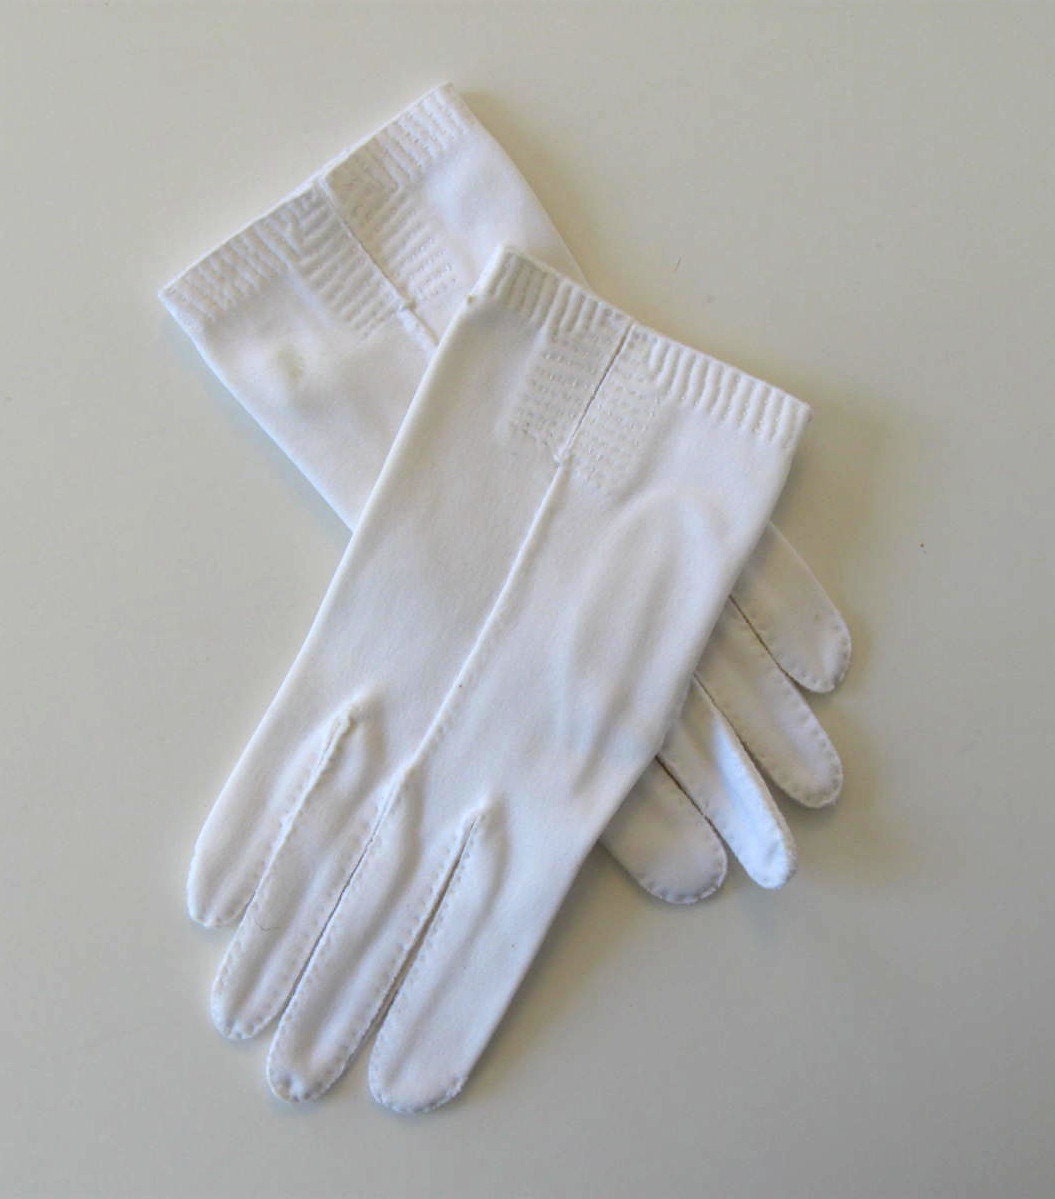 Vintage Short White Cotton Gloves Women's by jewelryandthings2